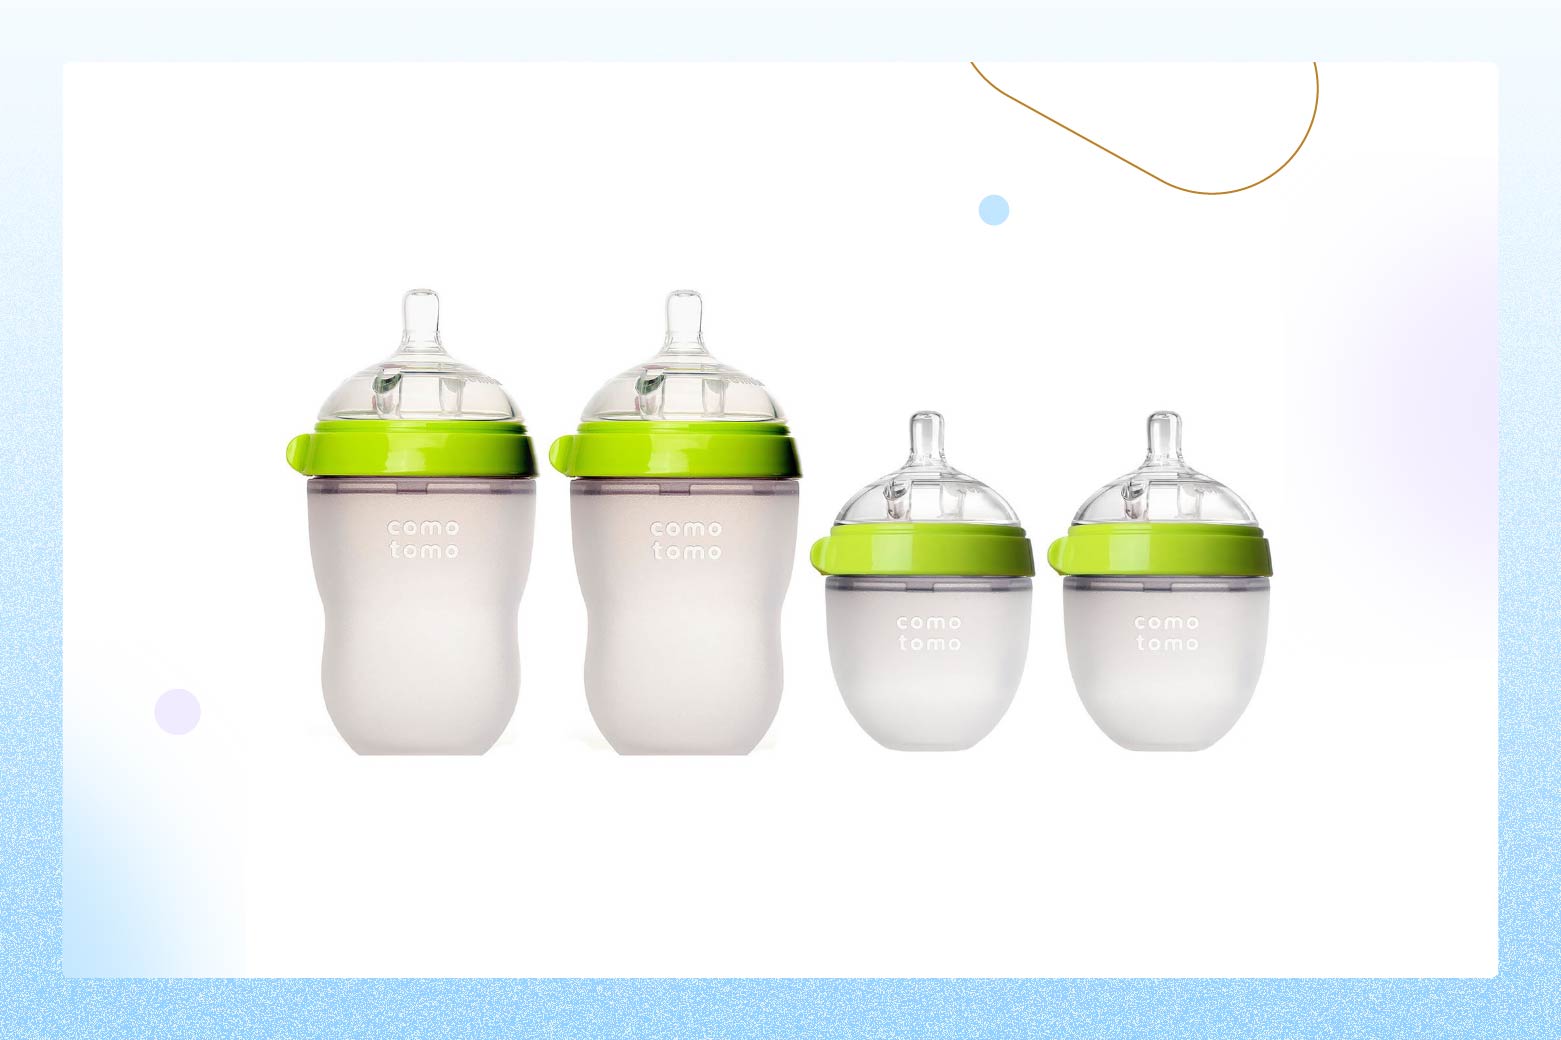 Product photo of four Comotomo Baby Bottles, two 5 ounce bottles and two 8 ounce bottles